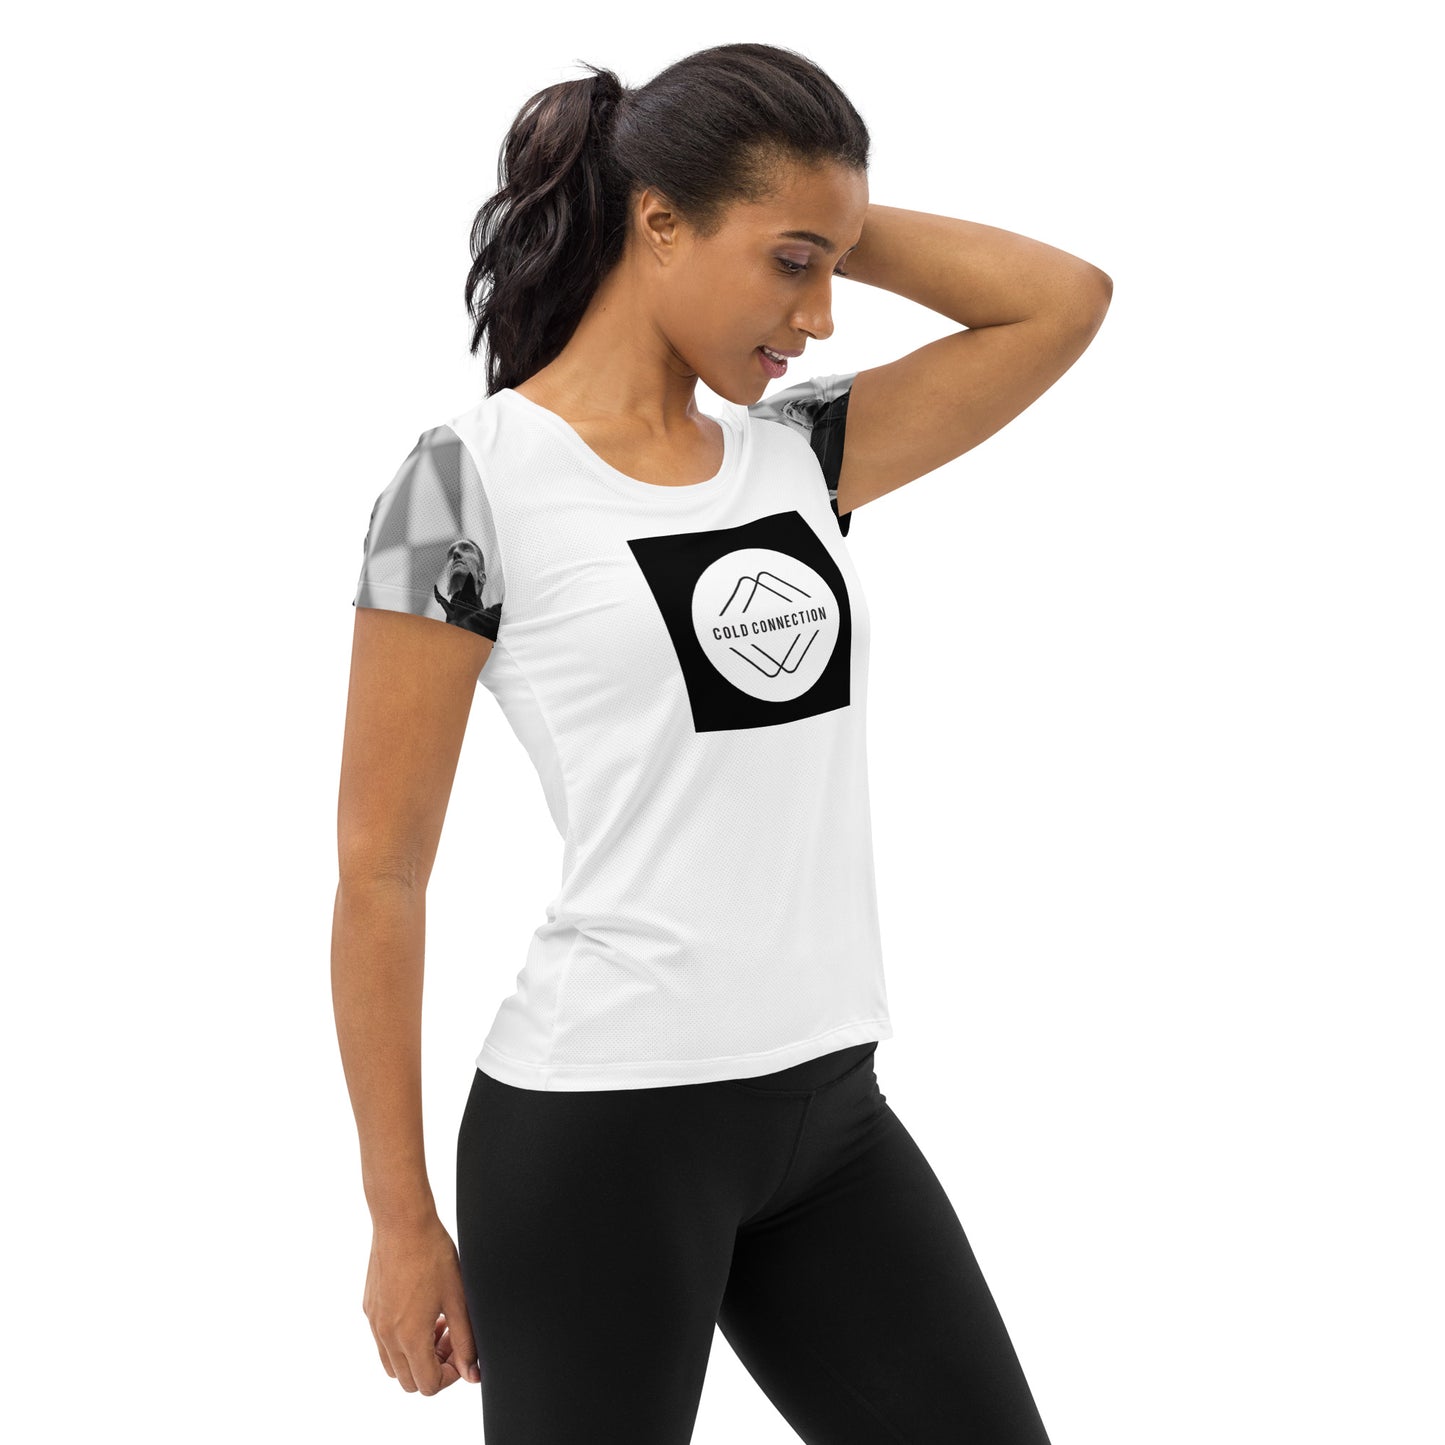 Cold Connection, official logo and band photo, All-Over Print Women's Athletic T-shirt